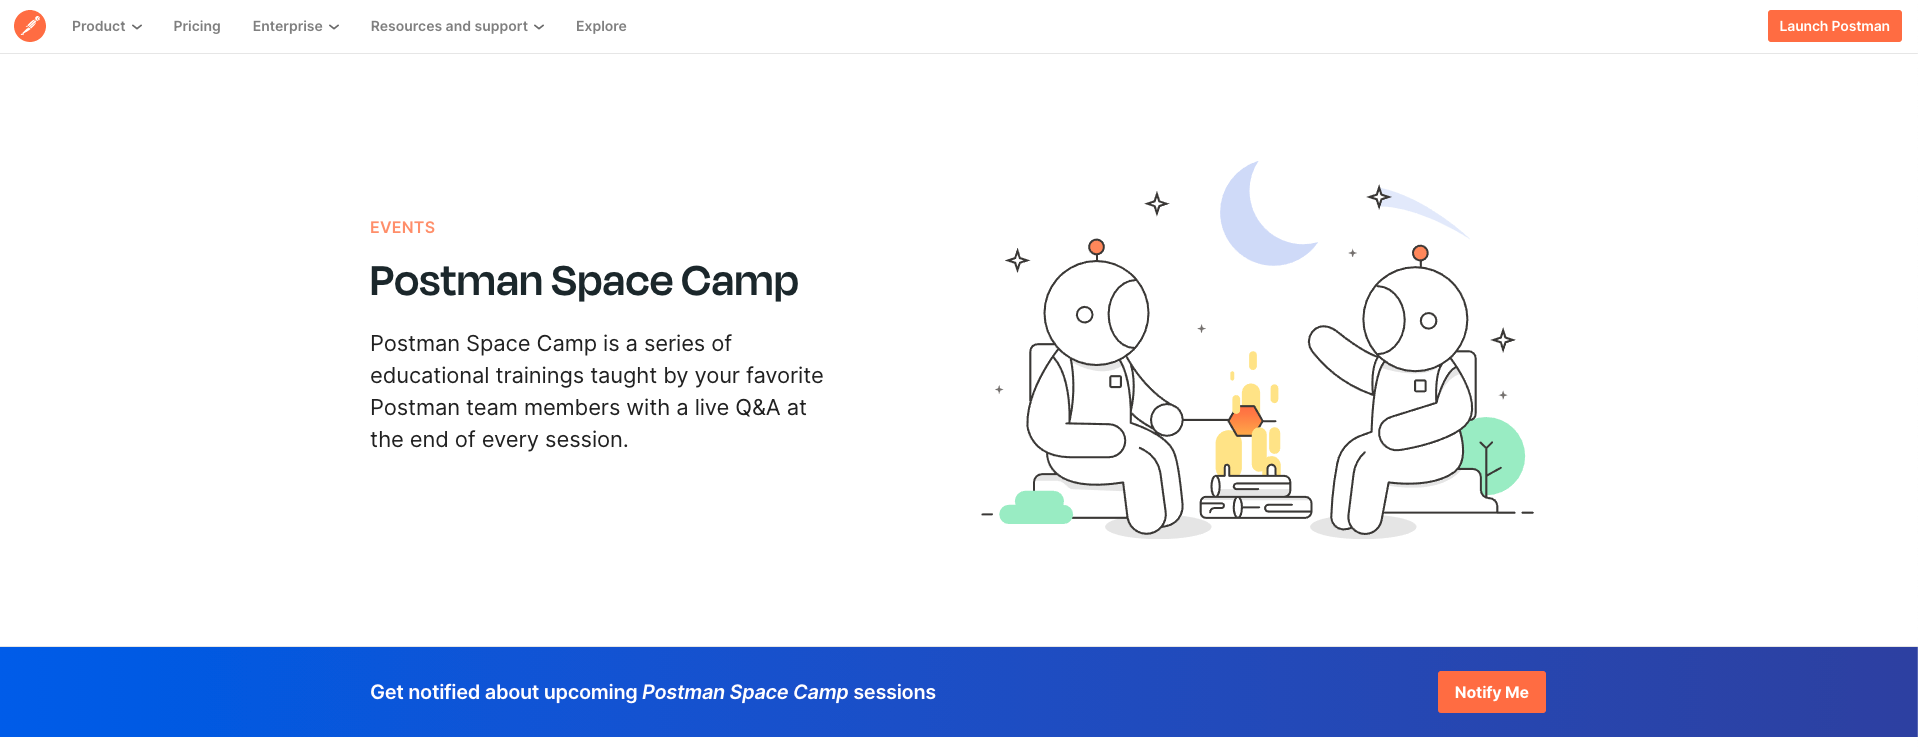 The Postman Space Camp home page where you can register for future sessions